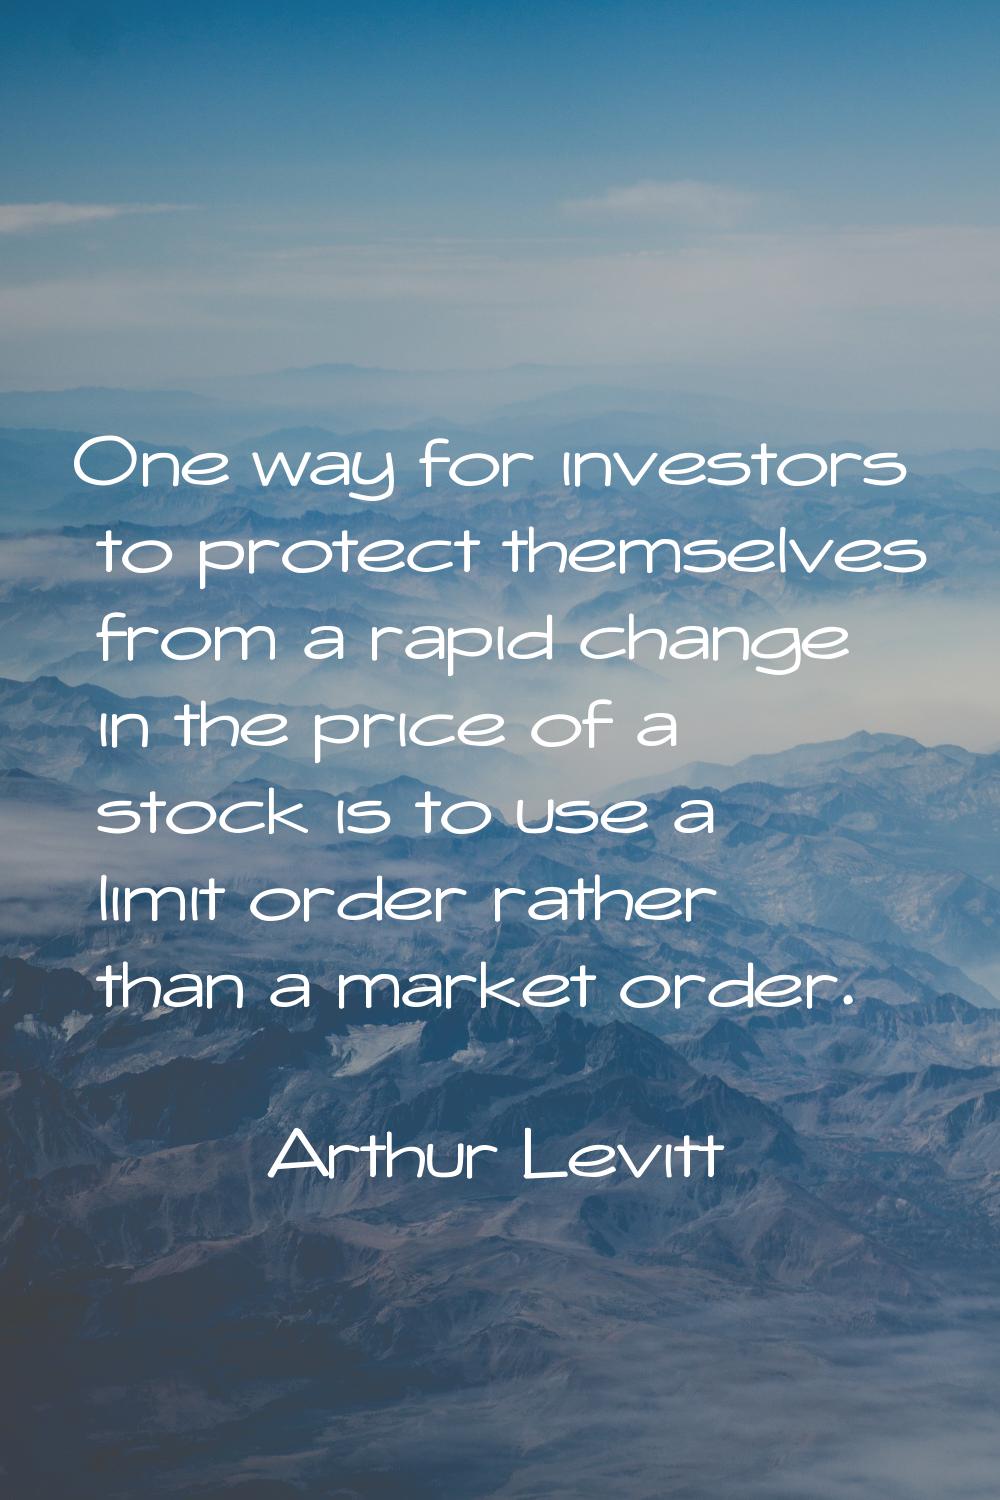 One way for investors to protect themselves from a rapid change in the price of a stock is to use a